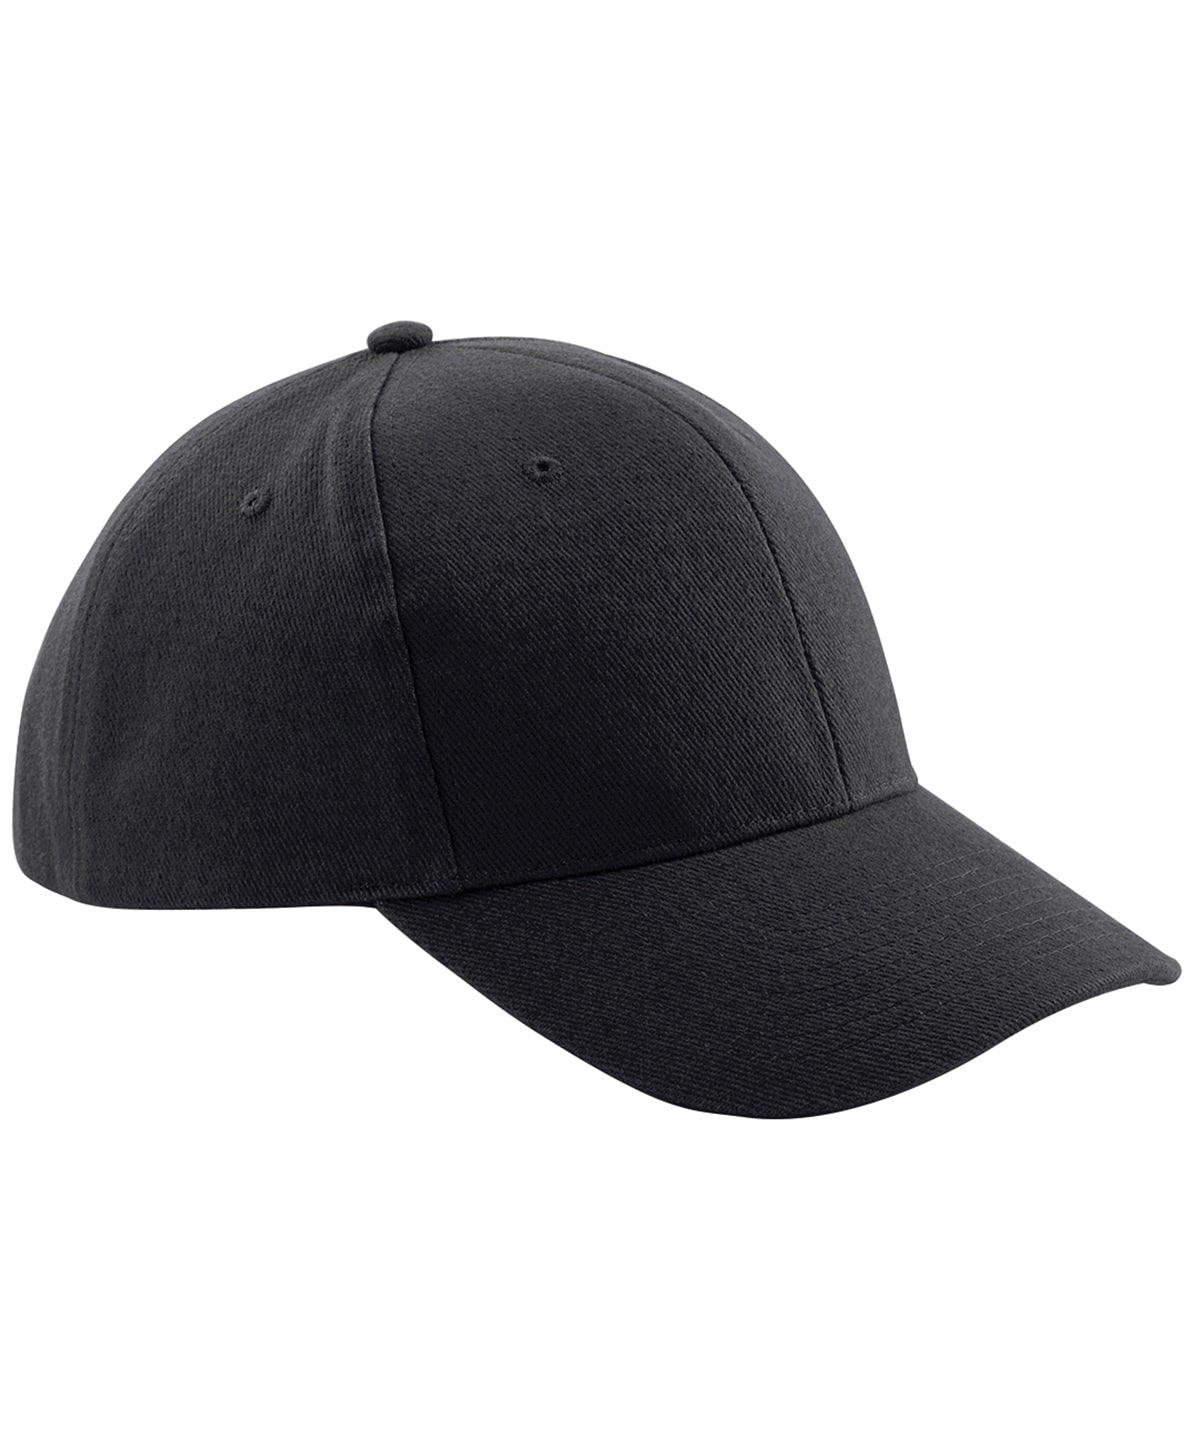 Personalised Caps - Black Beechfield Pro-style heavy brushed cotton cap